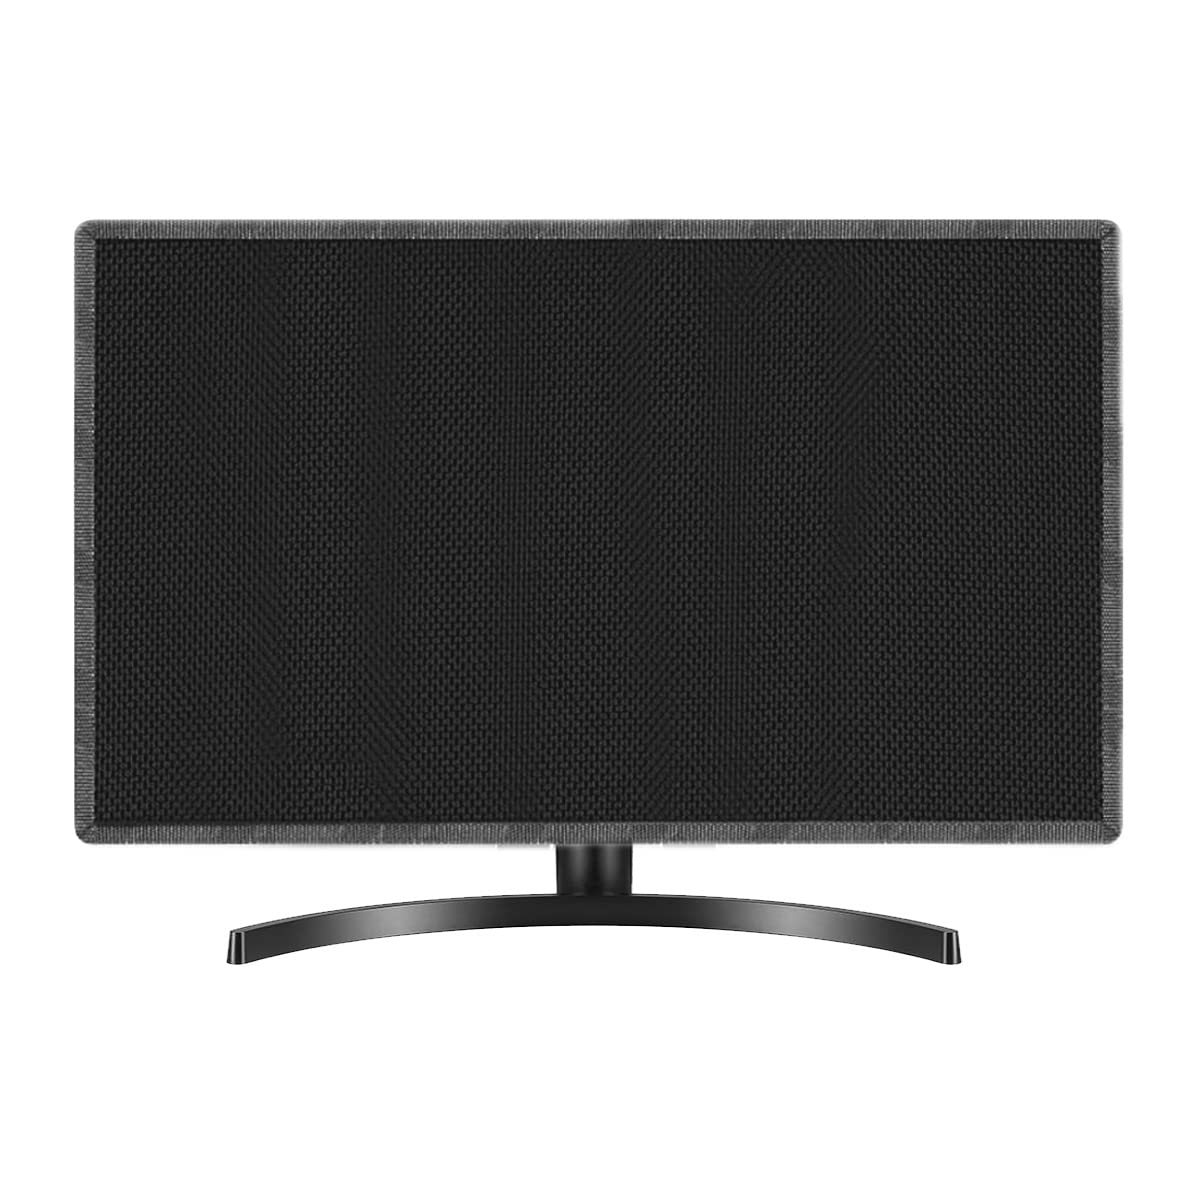 PalaP Super Premium Dust Proof Monitor Cover for LG 34 inches Monitor (Black)